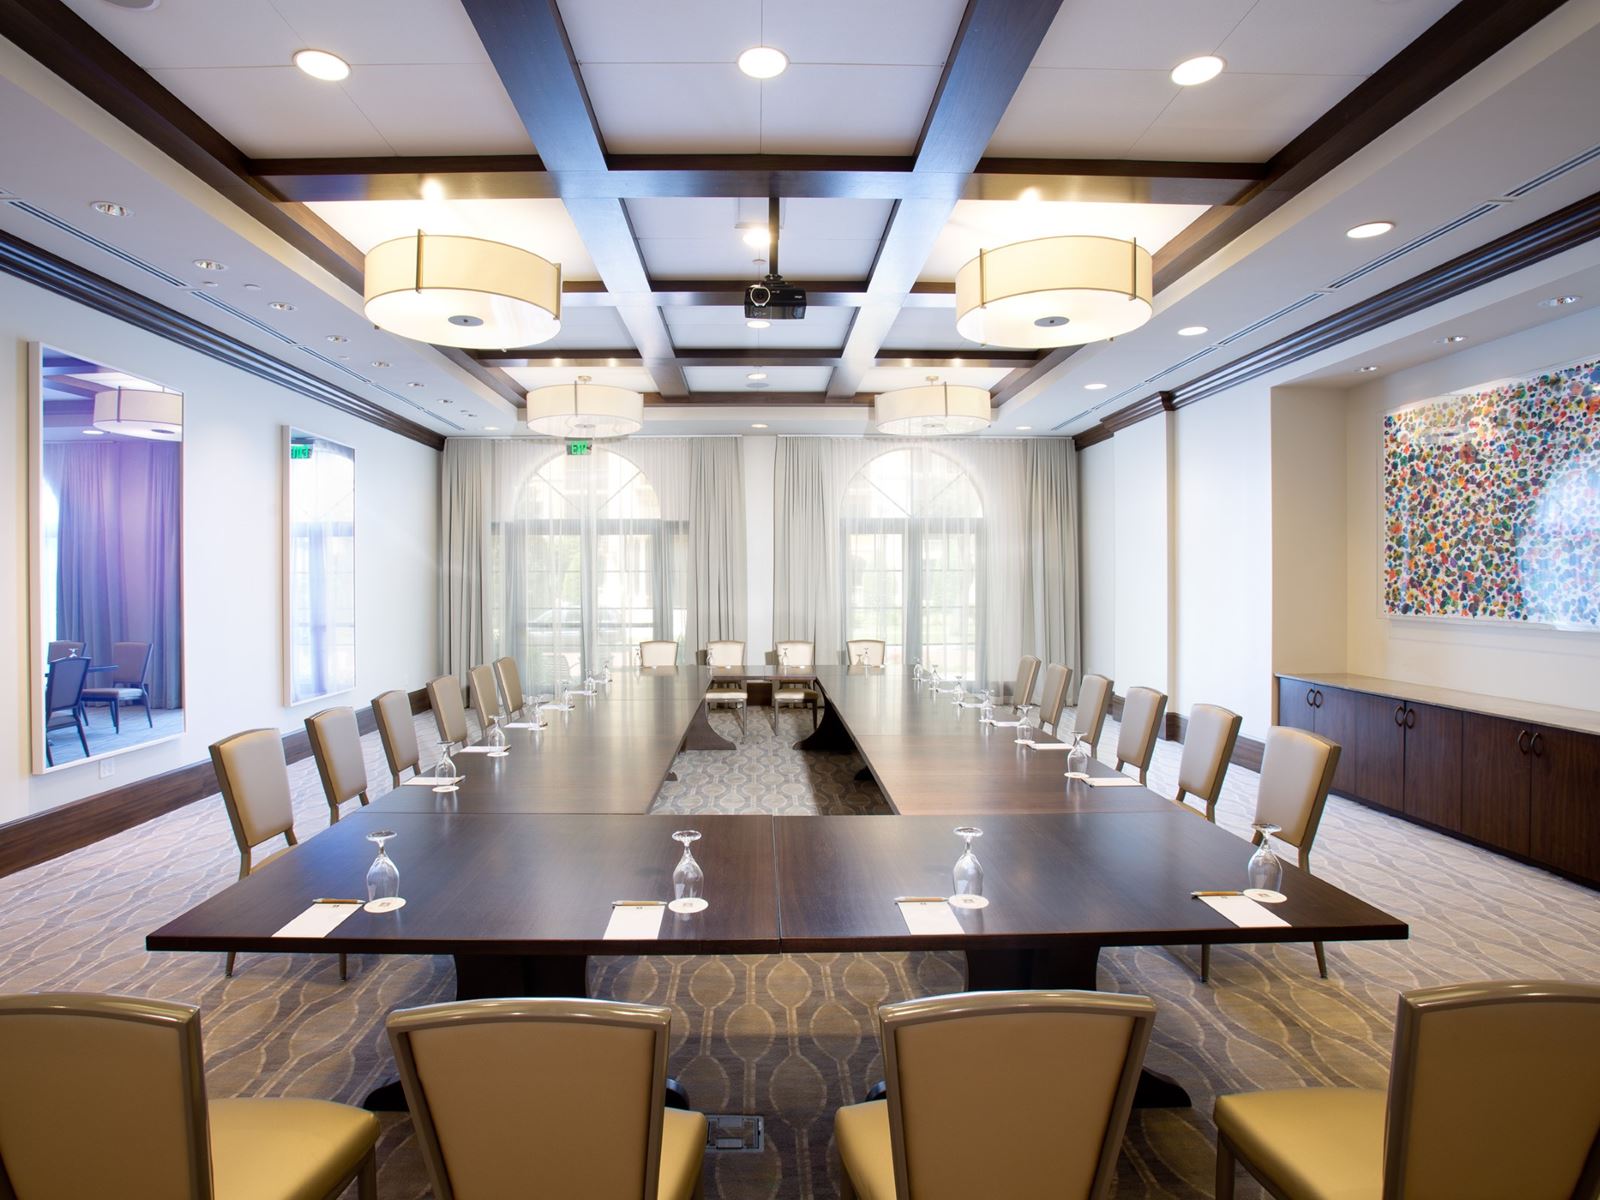 New England Meeting Rooms